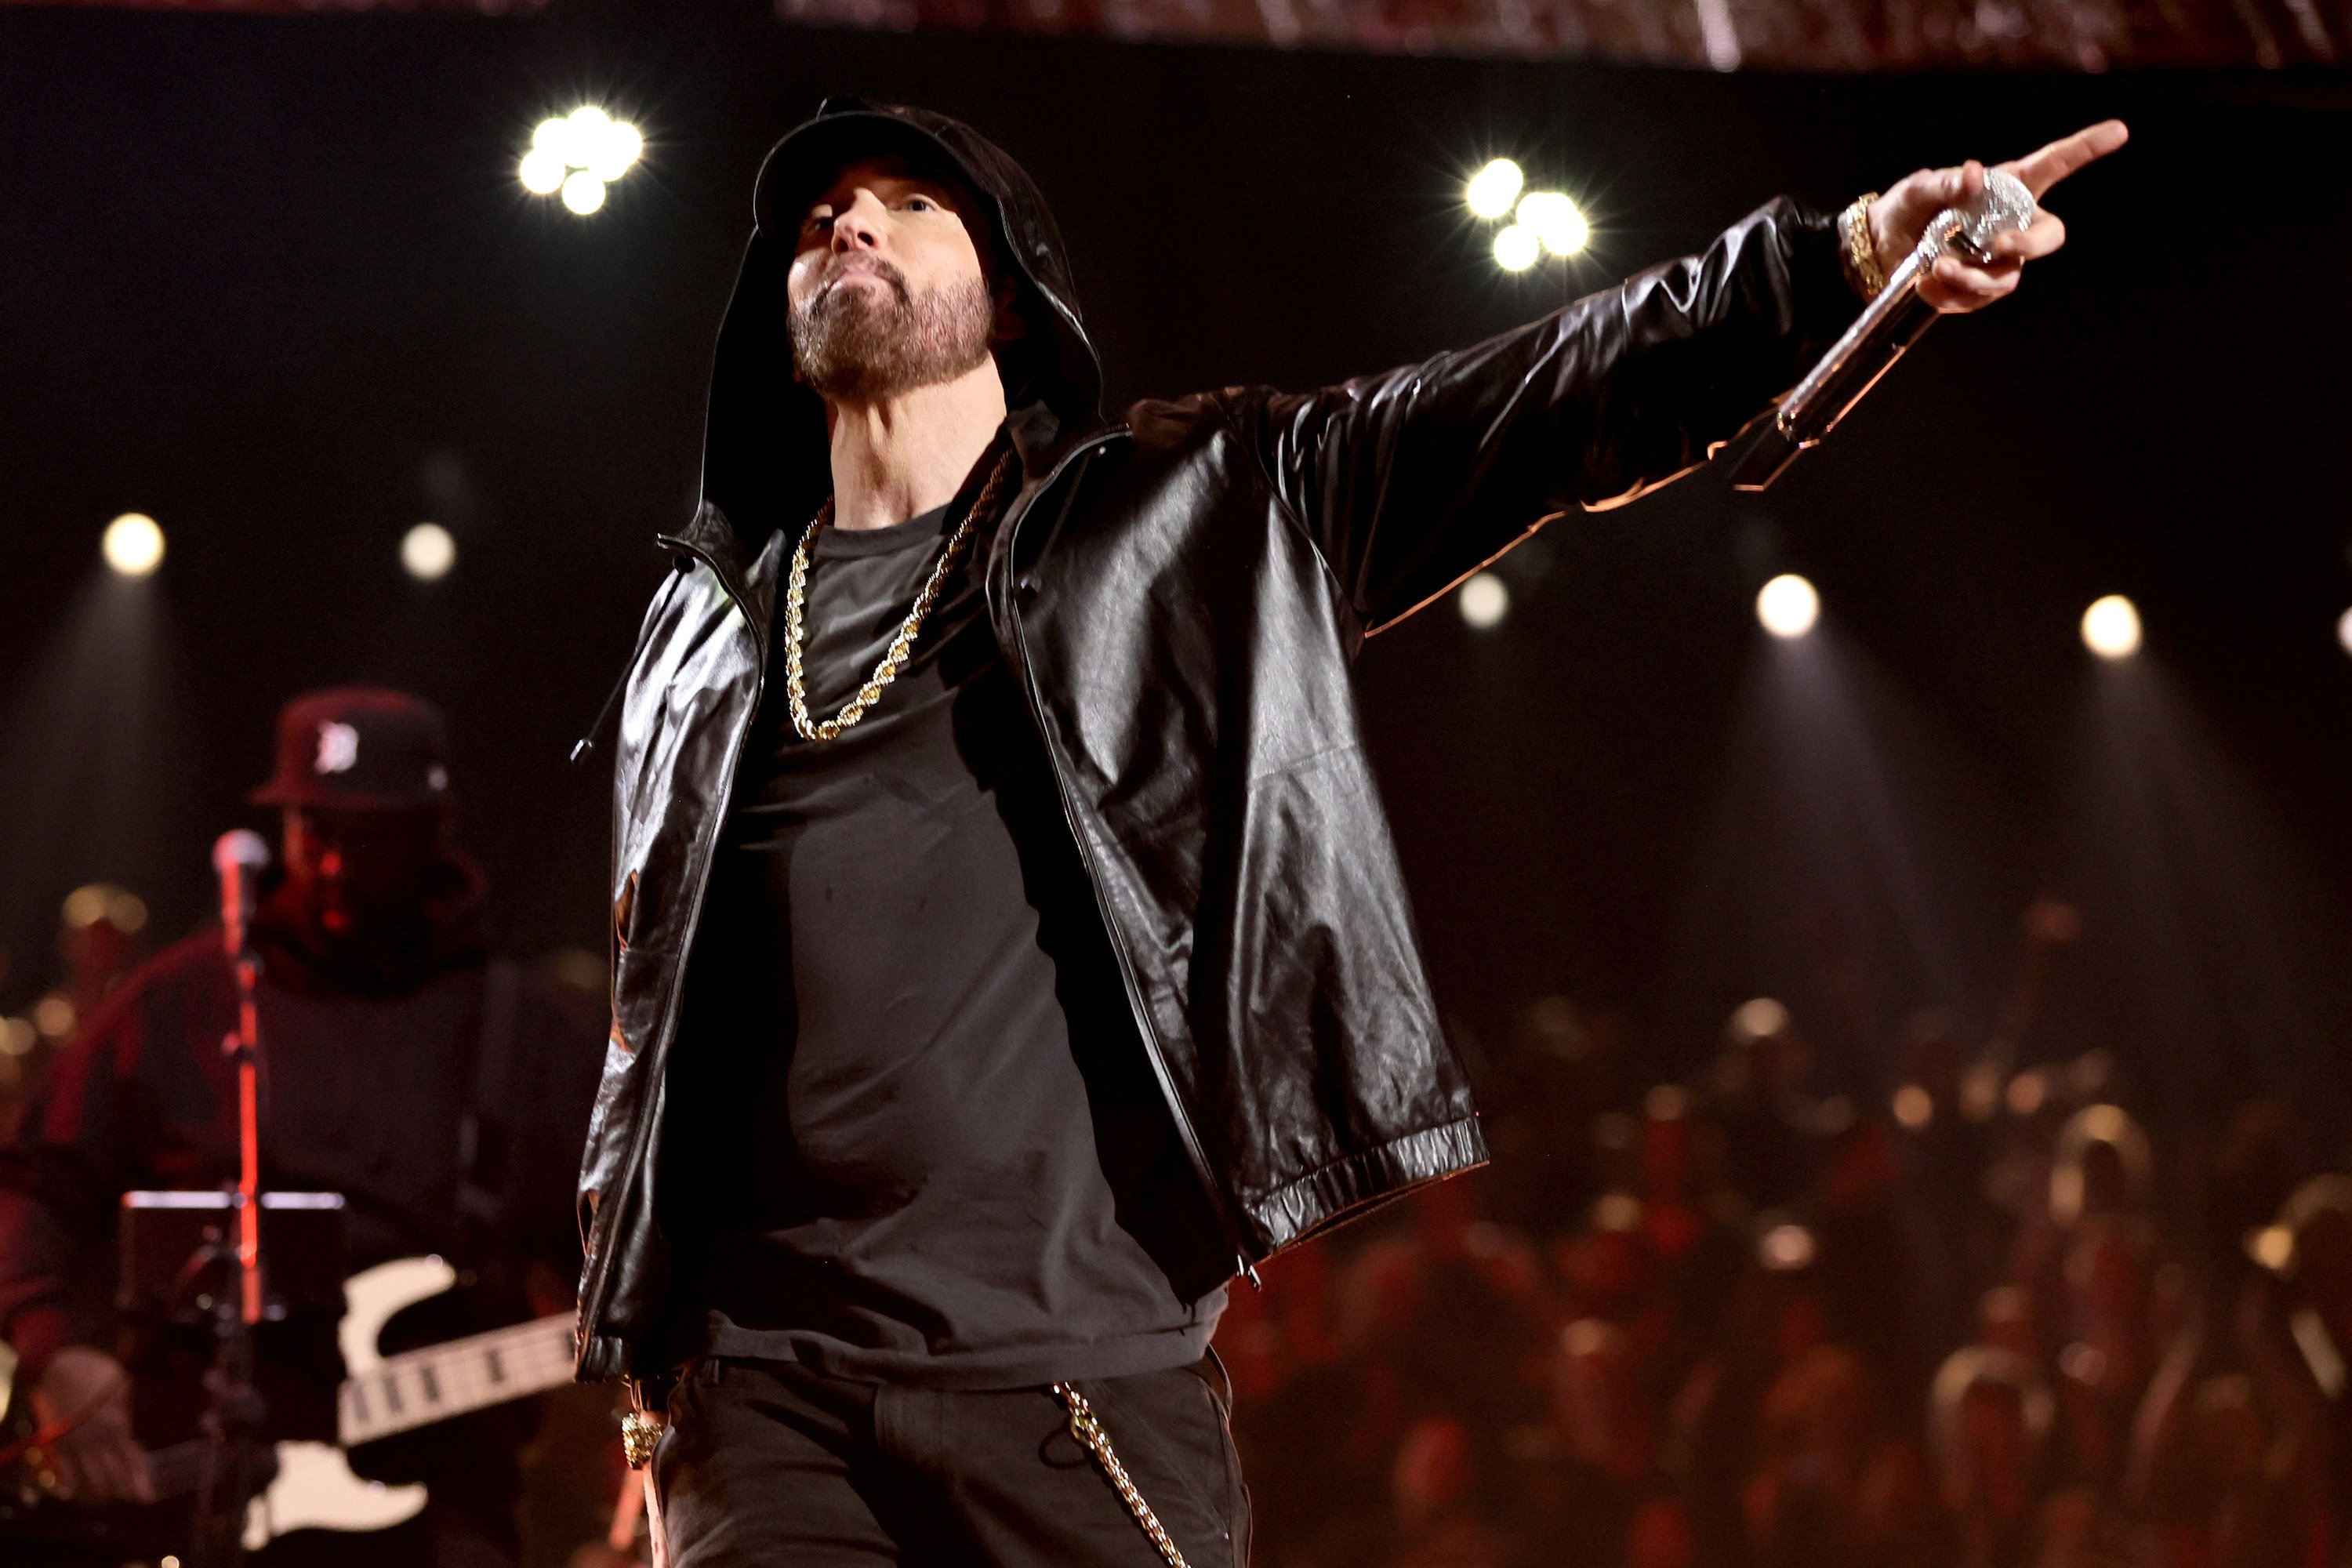 Eminem performs at the 37th annual Rock and Roll Hall of Fame Induction Ceremony in Los Angeles, California